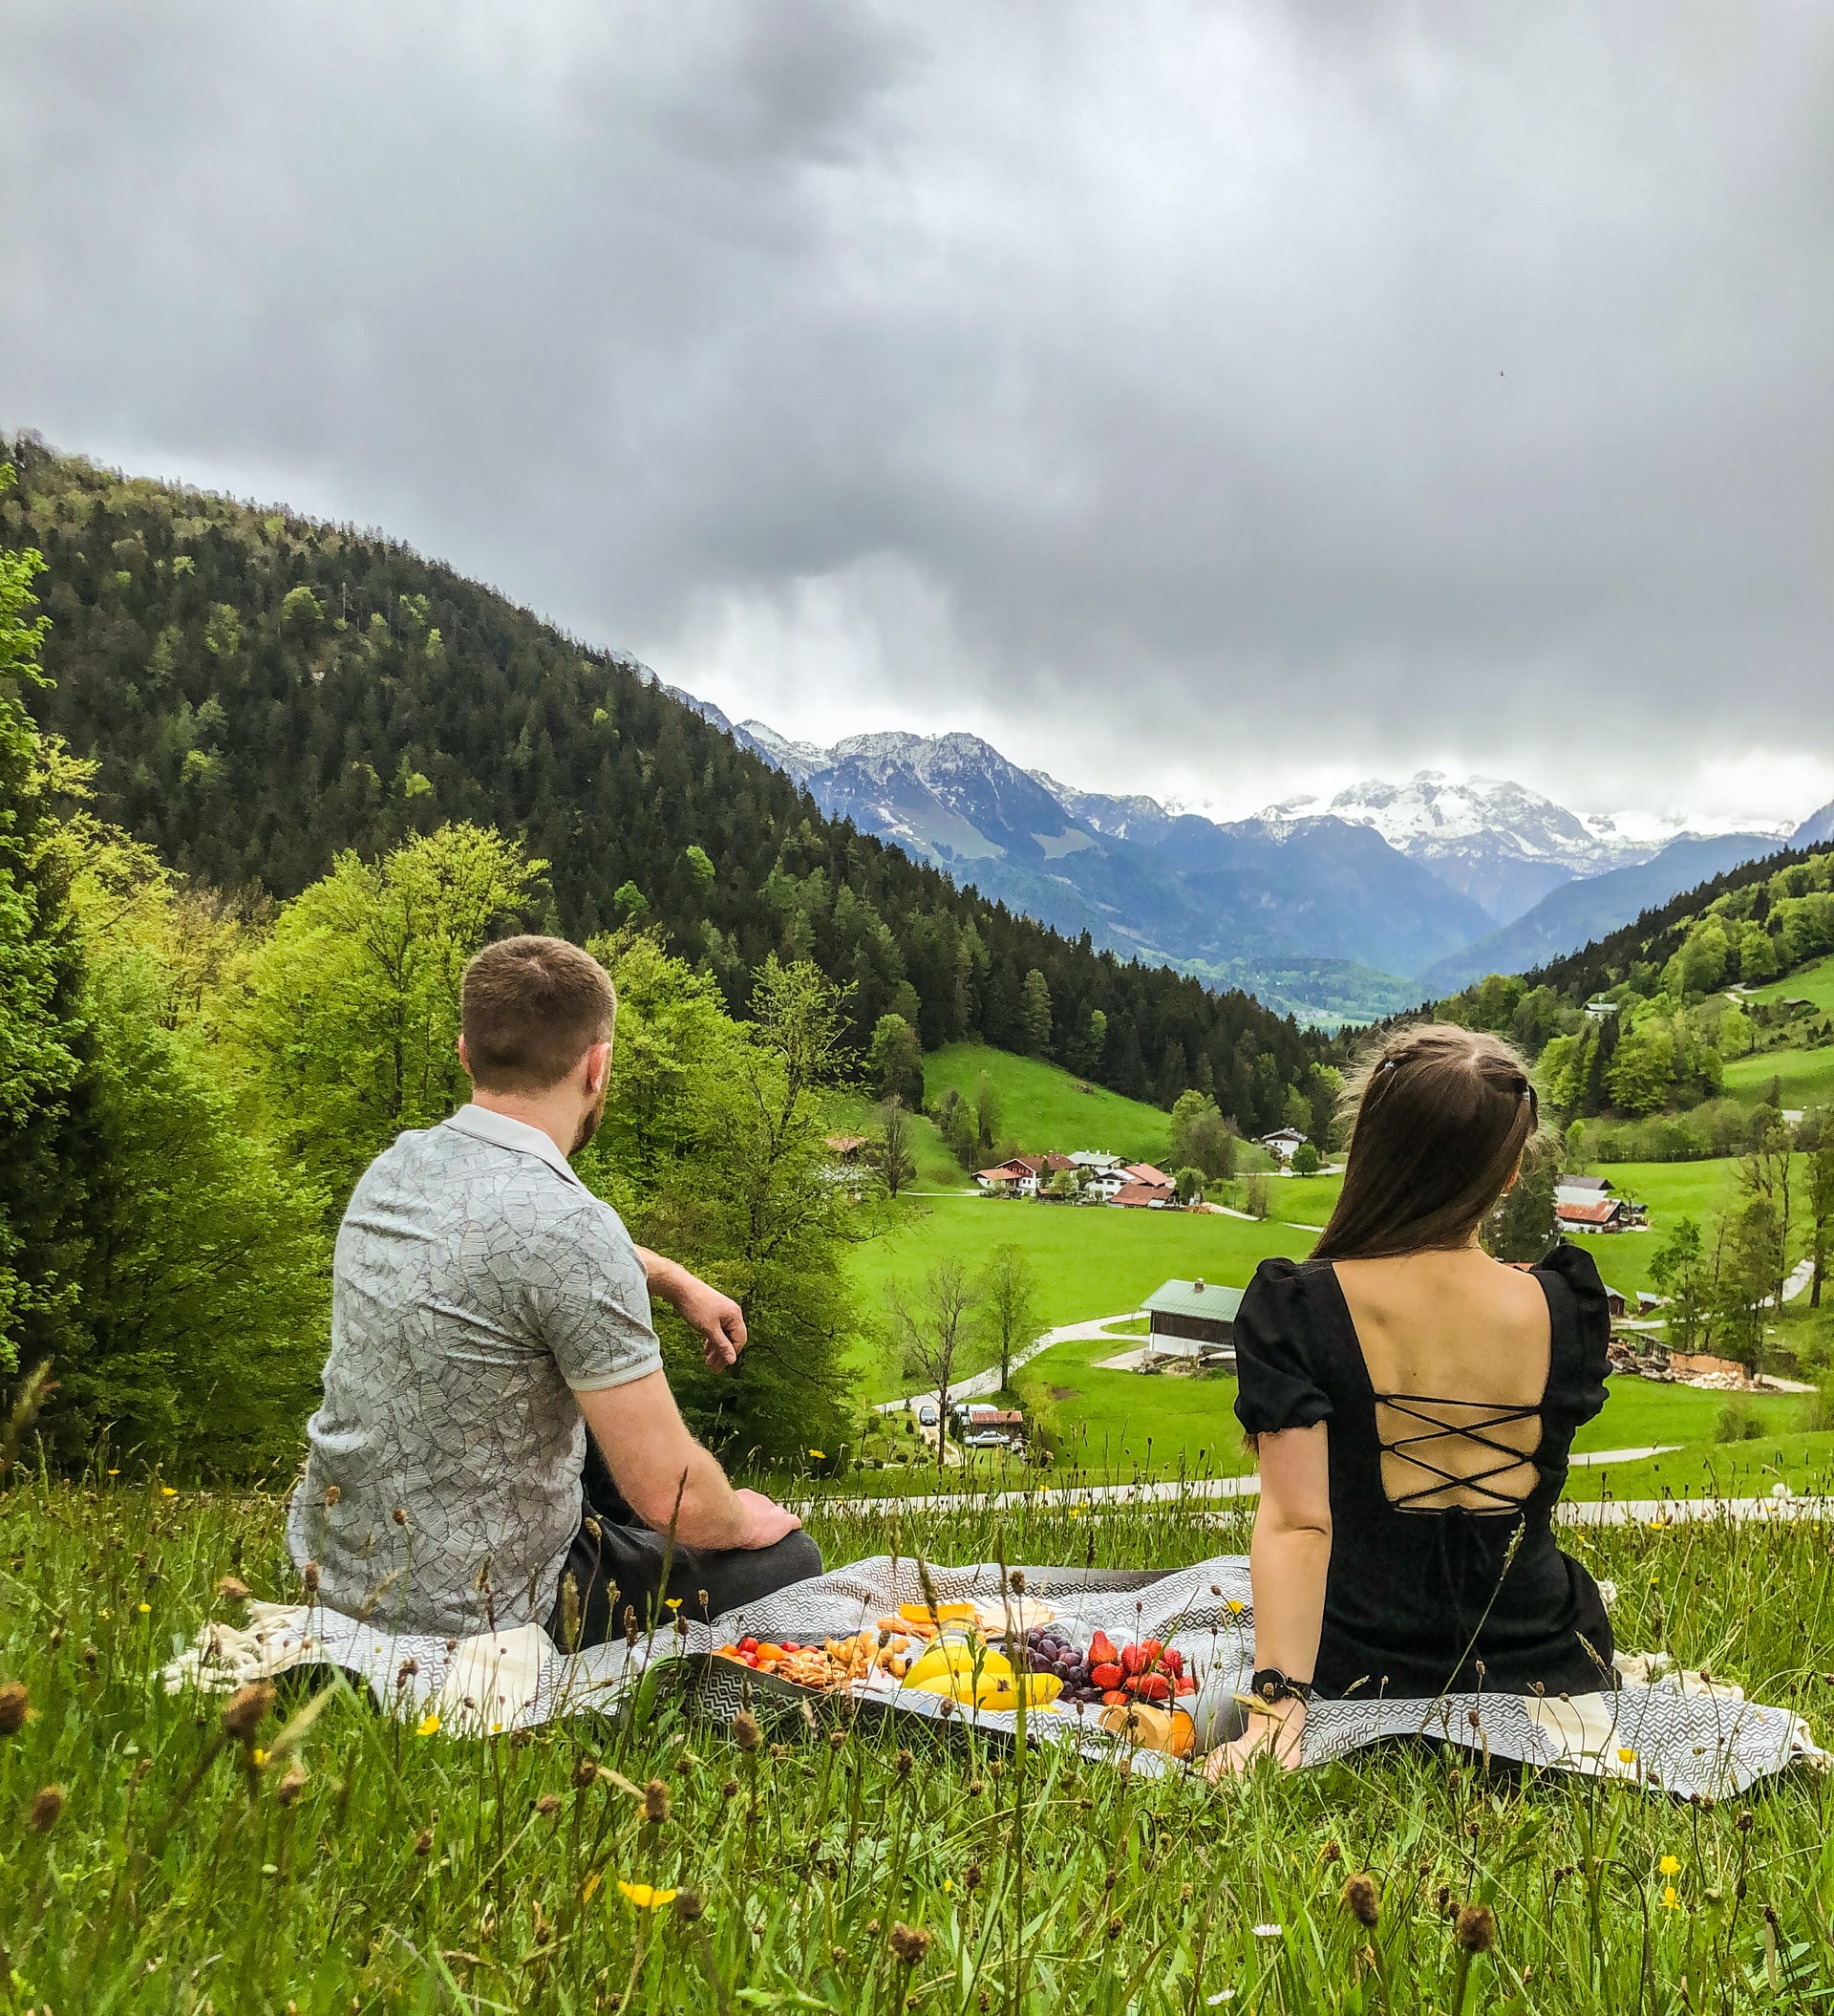 Picnic in mountains (photo: Ana Curcan)